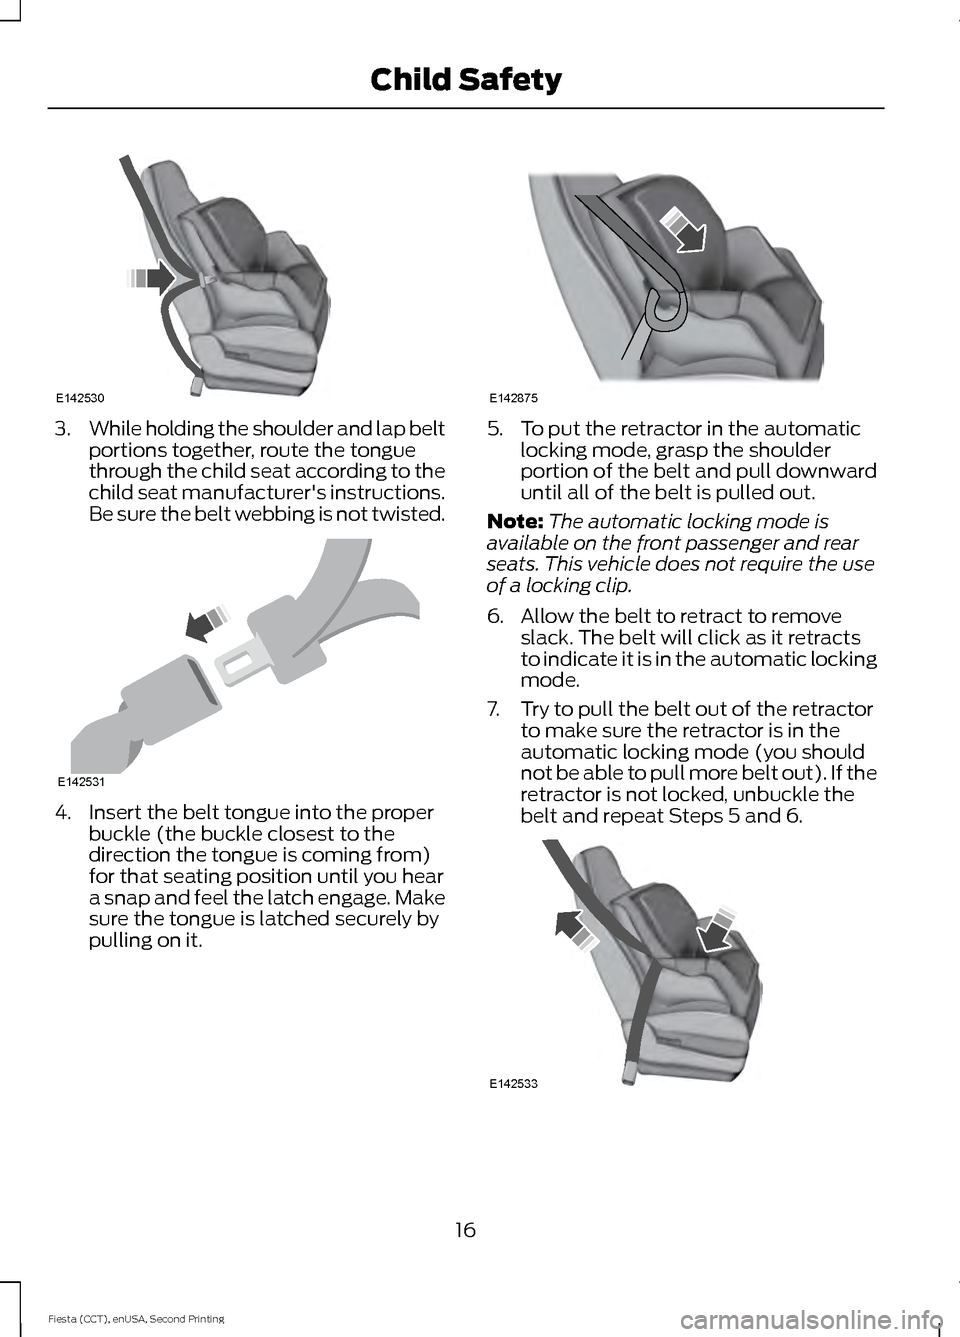 FORD FIESTA 2015 6.G Owners Manual 3.
While holding the shoulder and lap belt
portions together, route the tongue
through the child seat according to the
child seat manufacturers instructions.
Be sure the belt webbing is not twisted. 